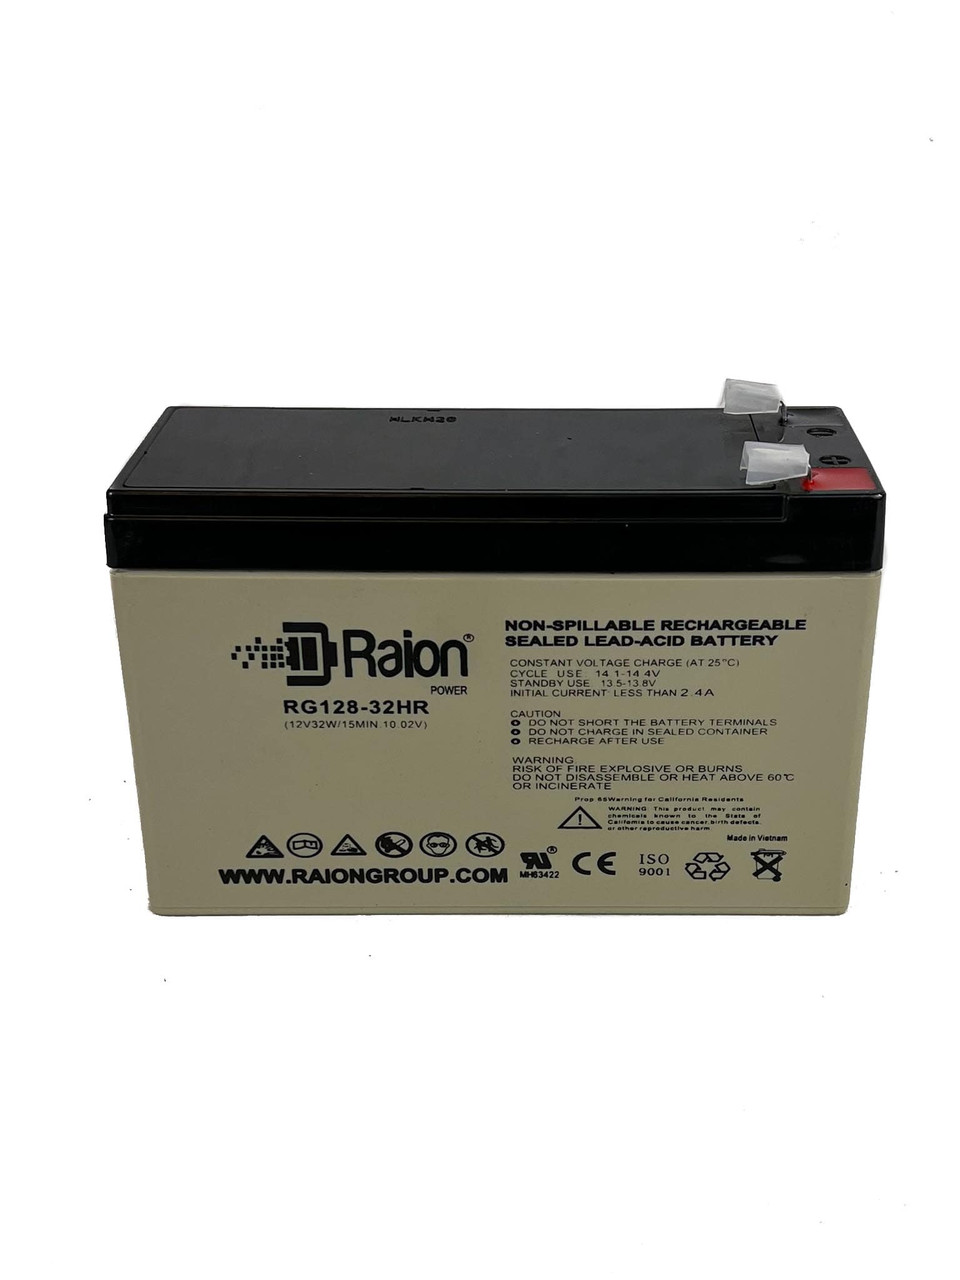 Raion Power RG128-32HR Replacement High Rate Battery Cartridge for Intellipower LA1075 UPS